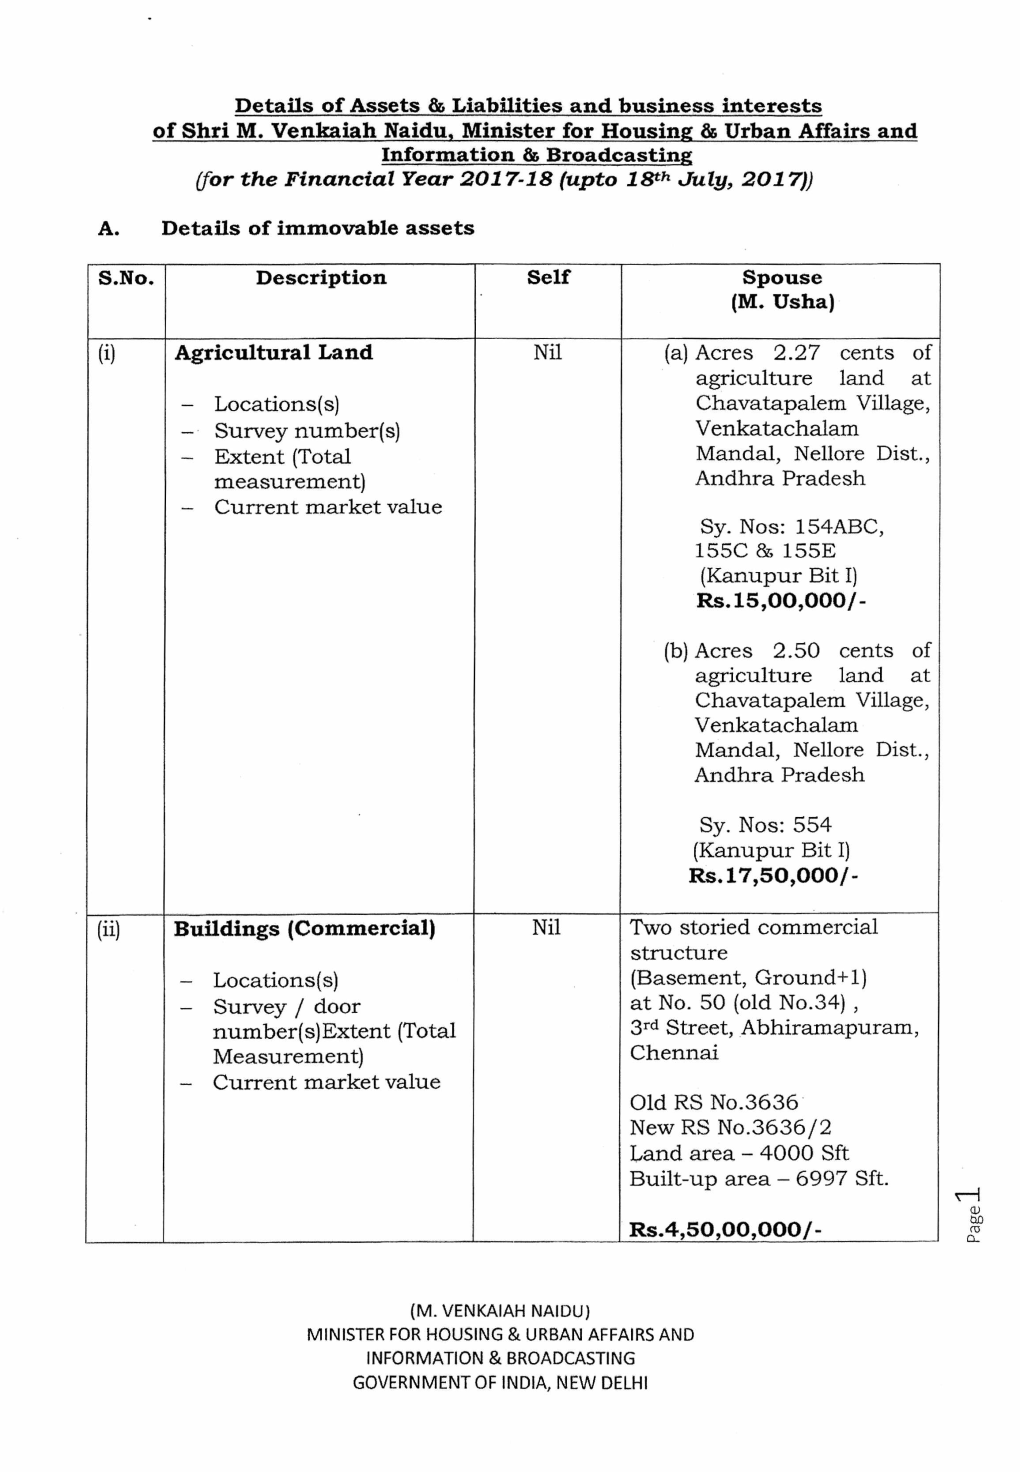 Details of Assets & Liabilities and Business Interests of Shri M